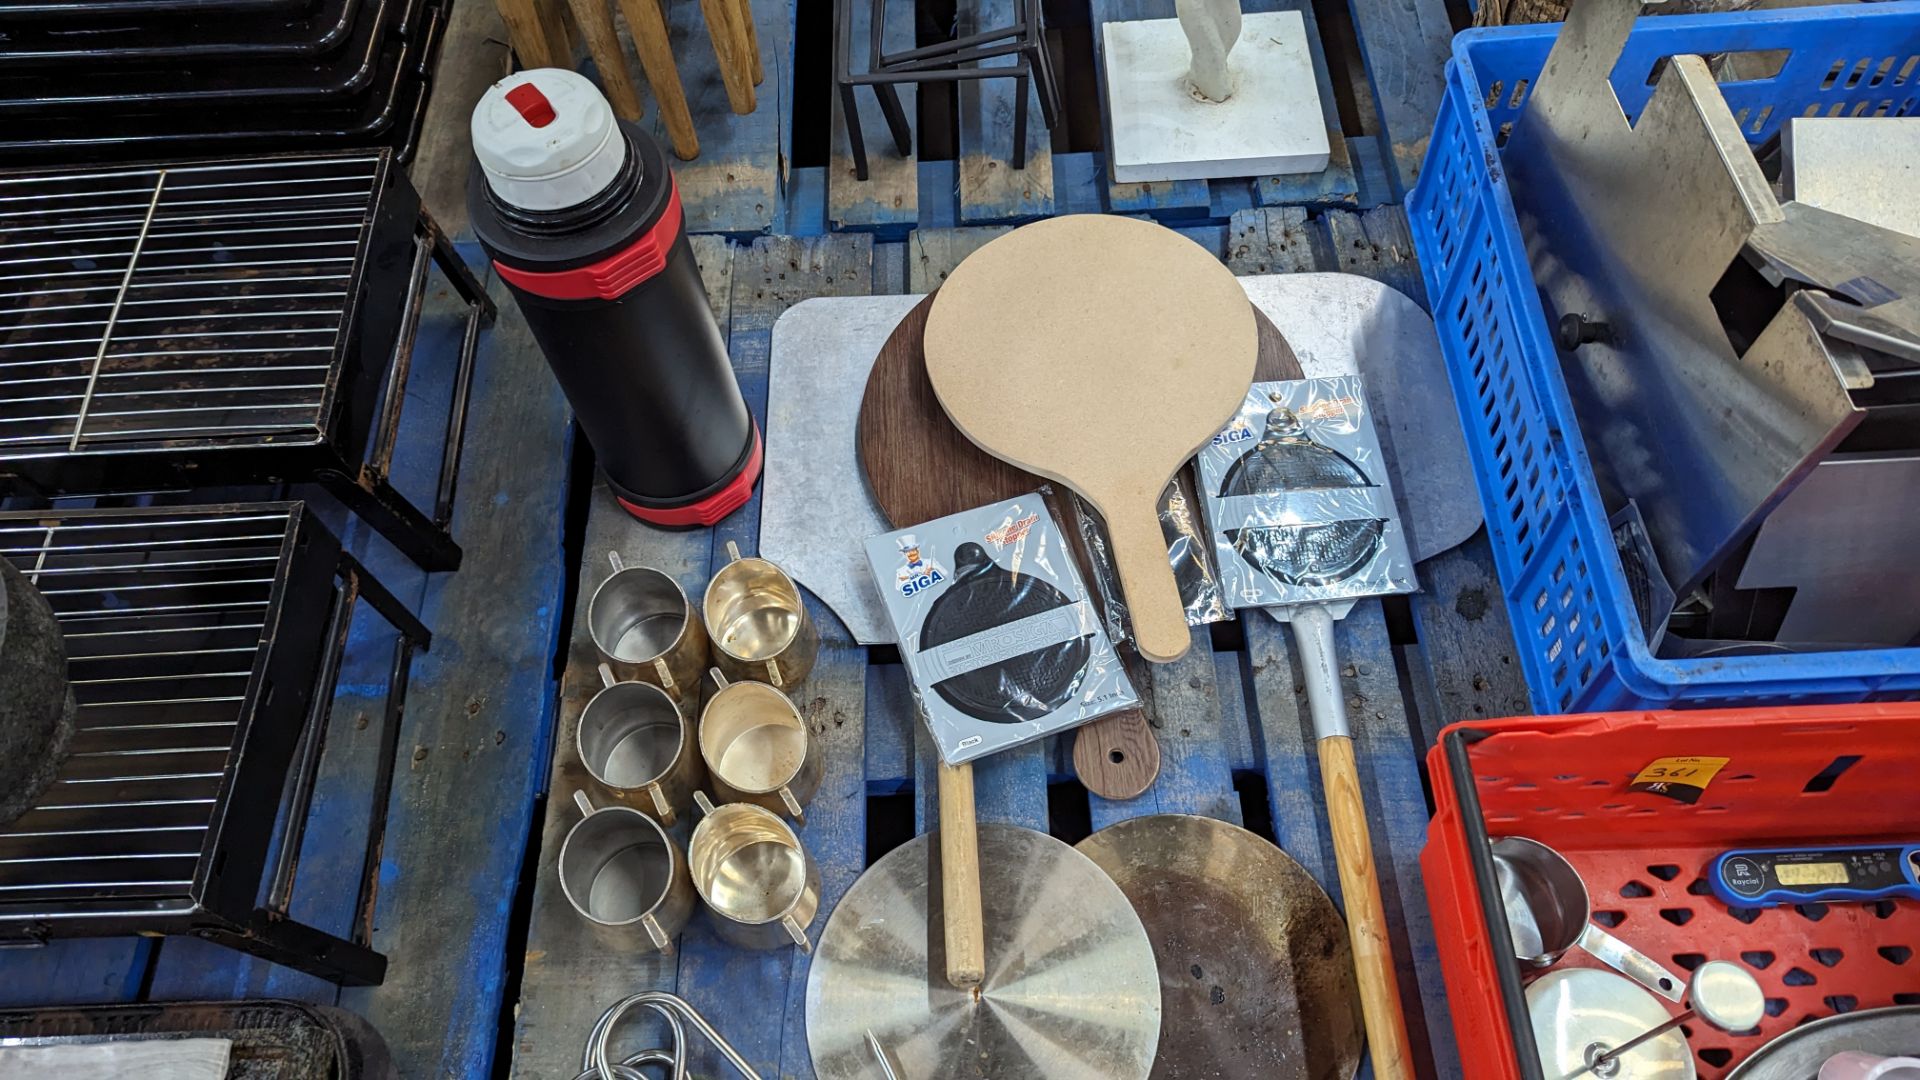 The contents of a pallet of miscellaneous items including stainless steel components, small jugs, se - Image 6 of 8